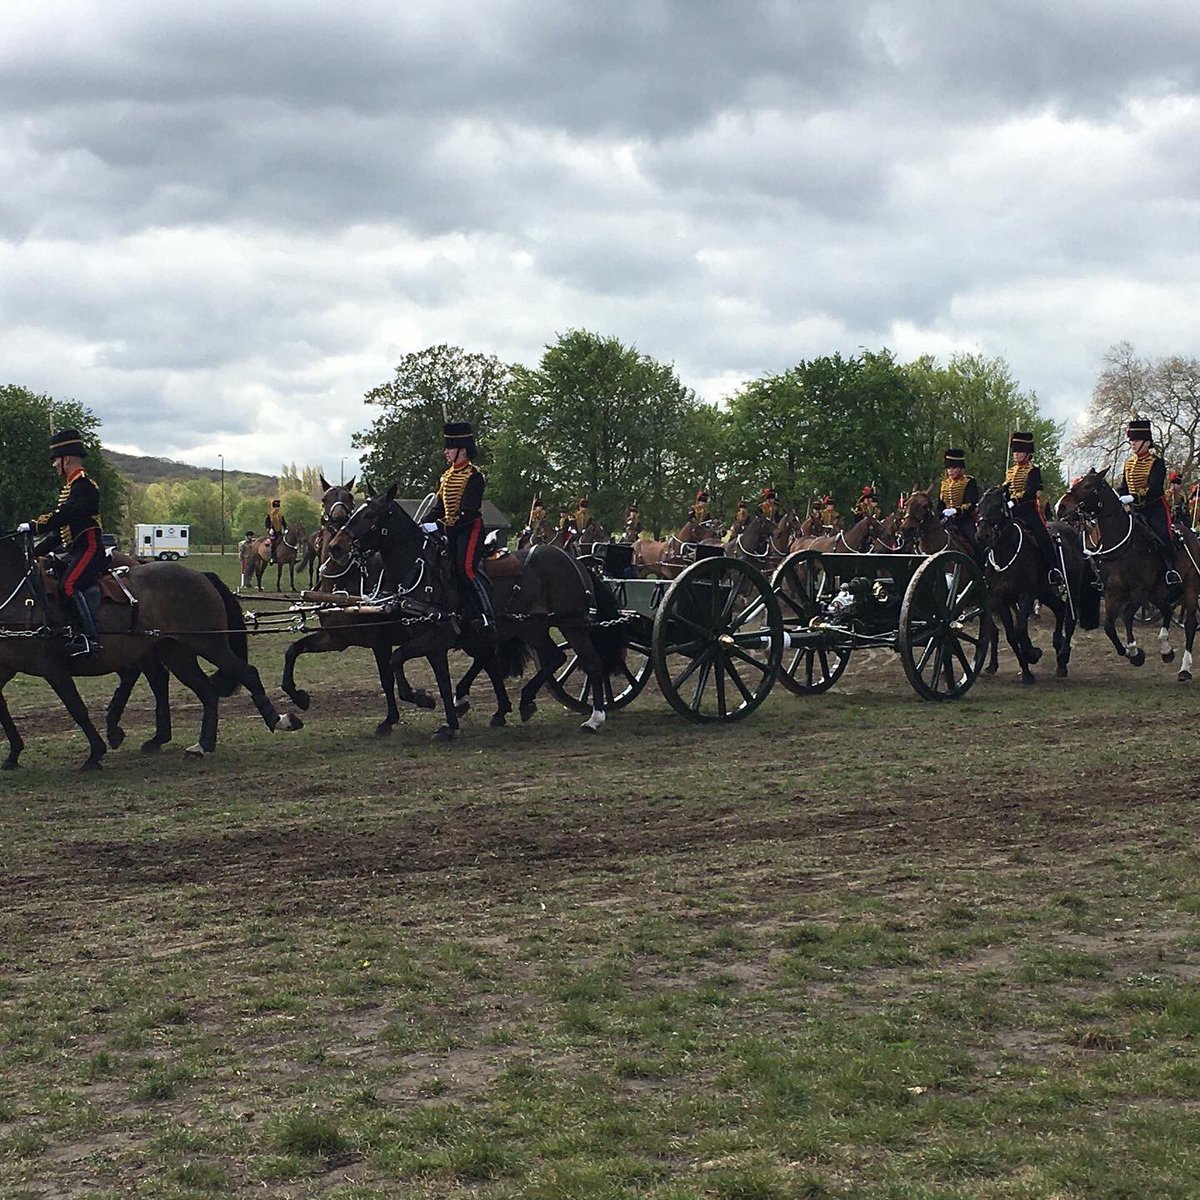 Congratulations to King’s Troop Royal Horse Artillery for passing their annual Major General’s inspection to determine if they are fit for role for the upcoming seasons after a stunning display of slick professionalism, riding skill and split second timing. @kingstroopRHA